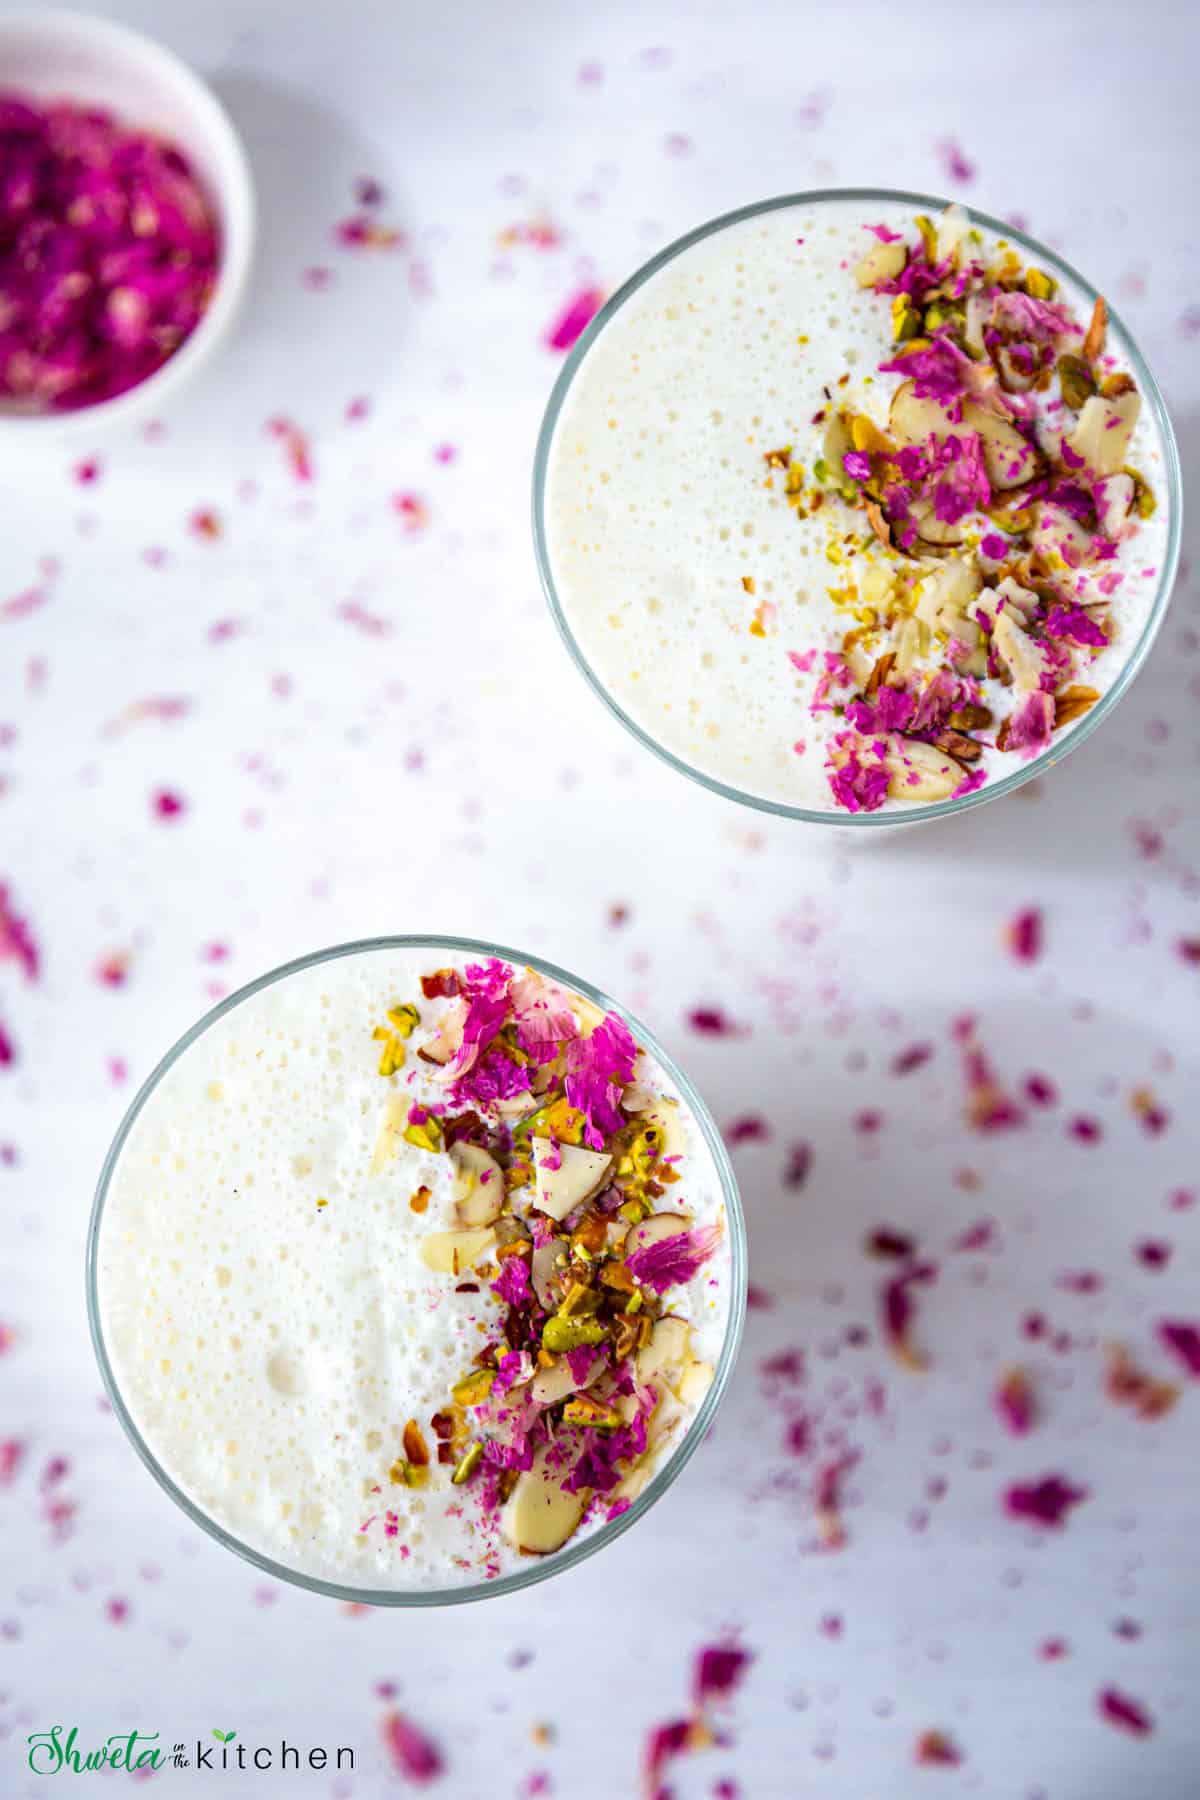 Top view of two glasses full of sweet lassi garnished with nuts and rose petals